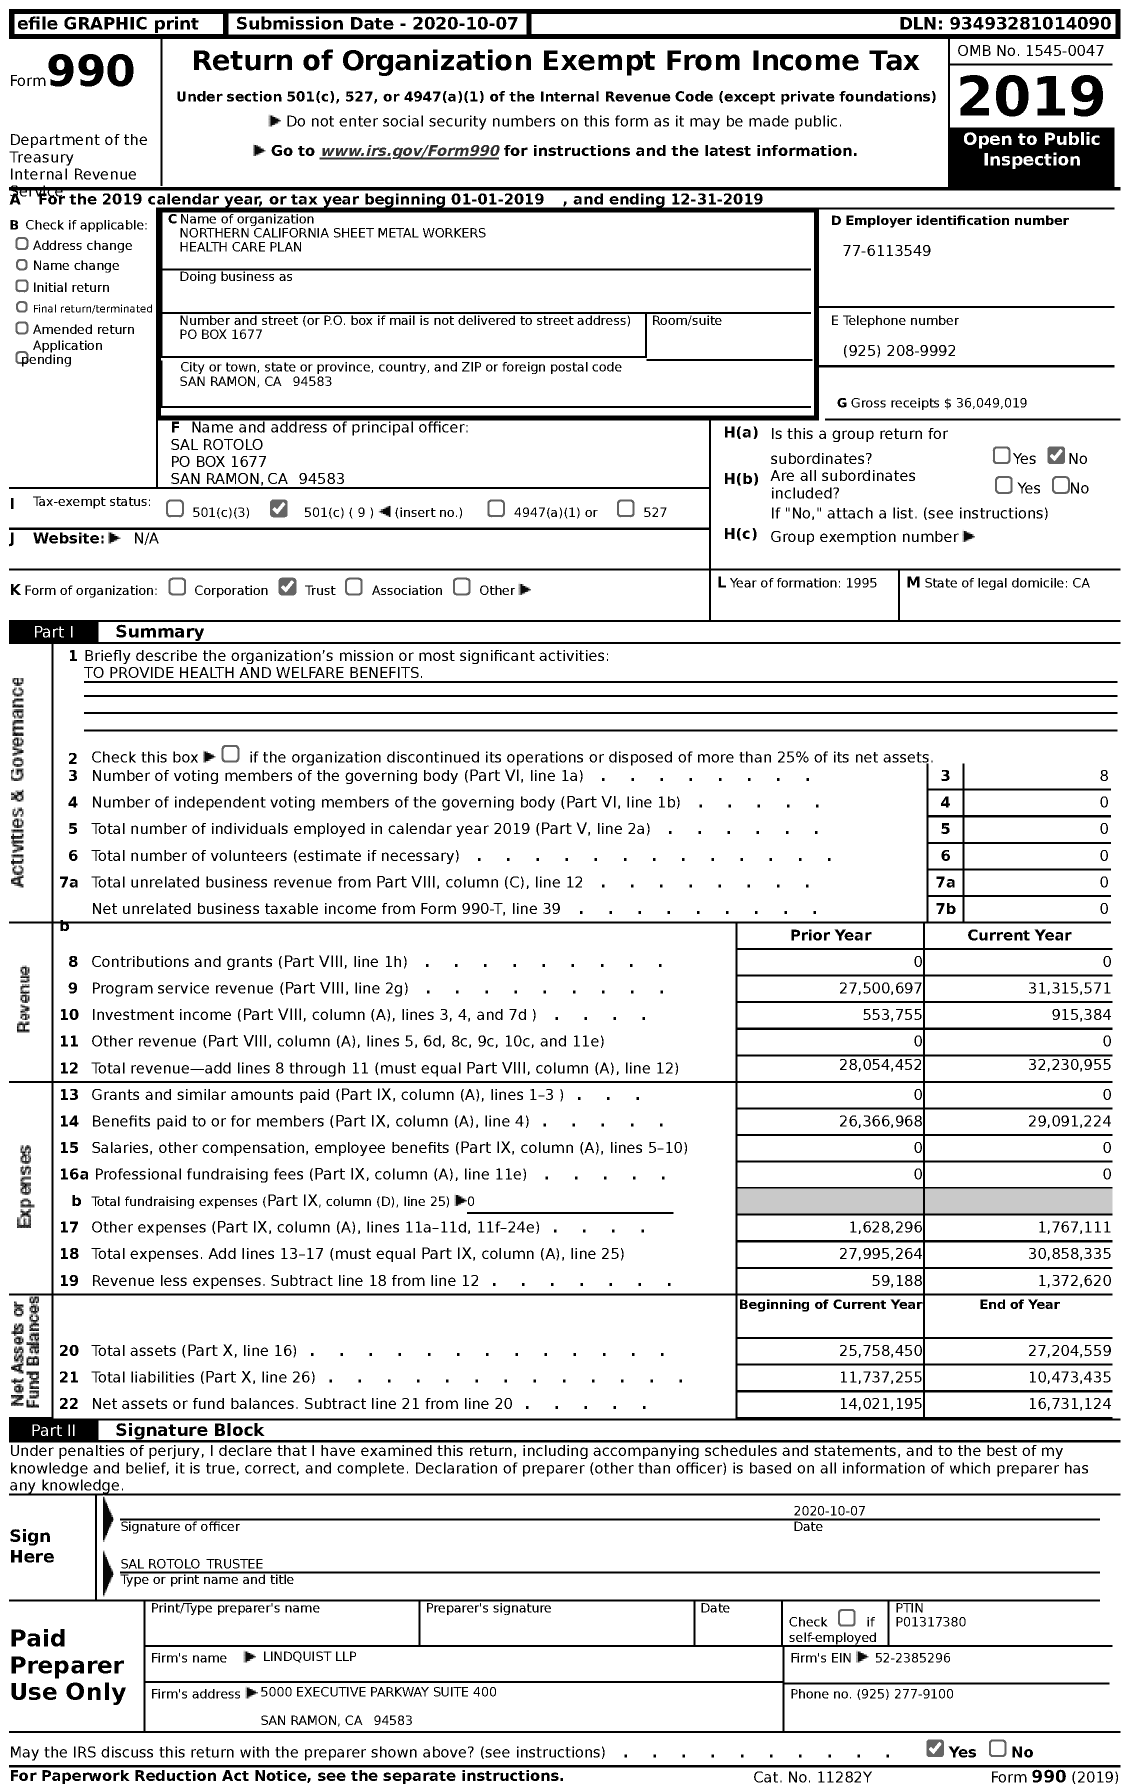 Image of first page of 2019 Form 990 for Northern California Sheet Metal Workers Health Care Plan